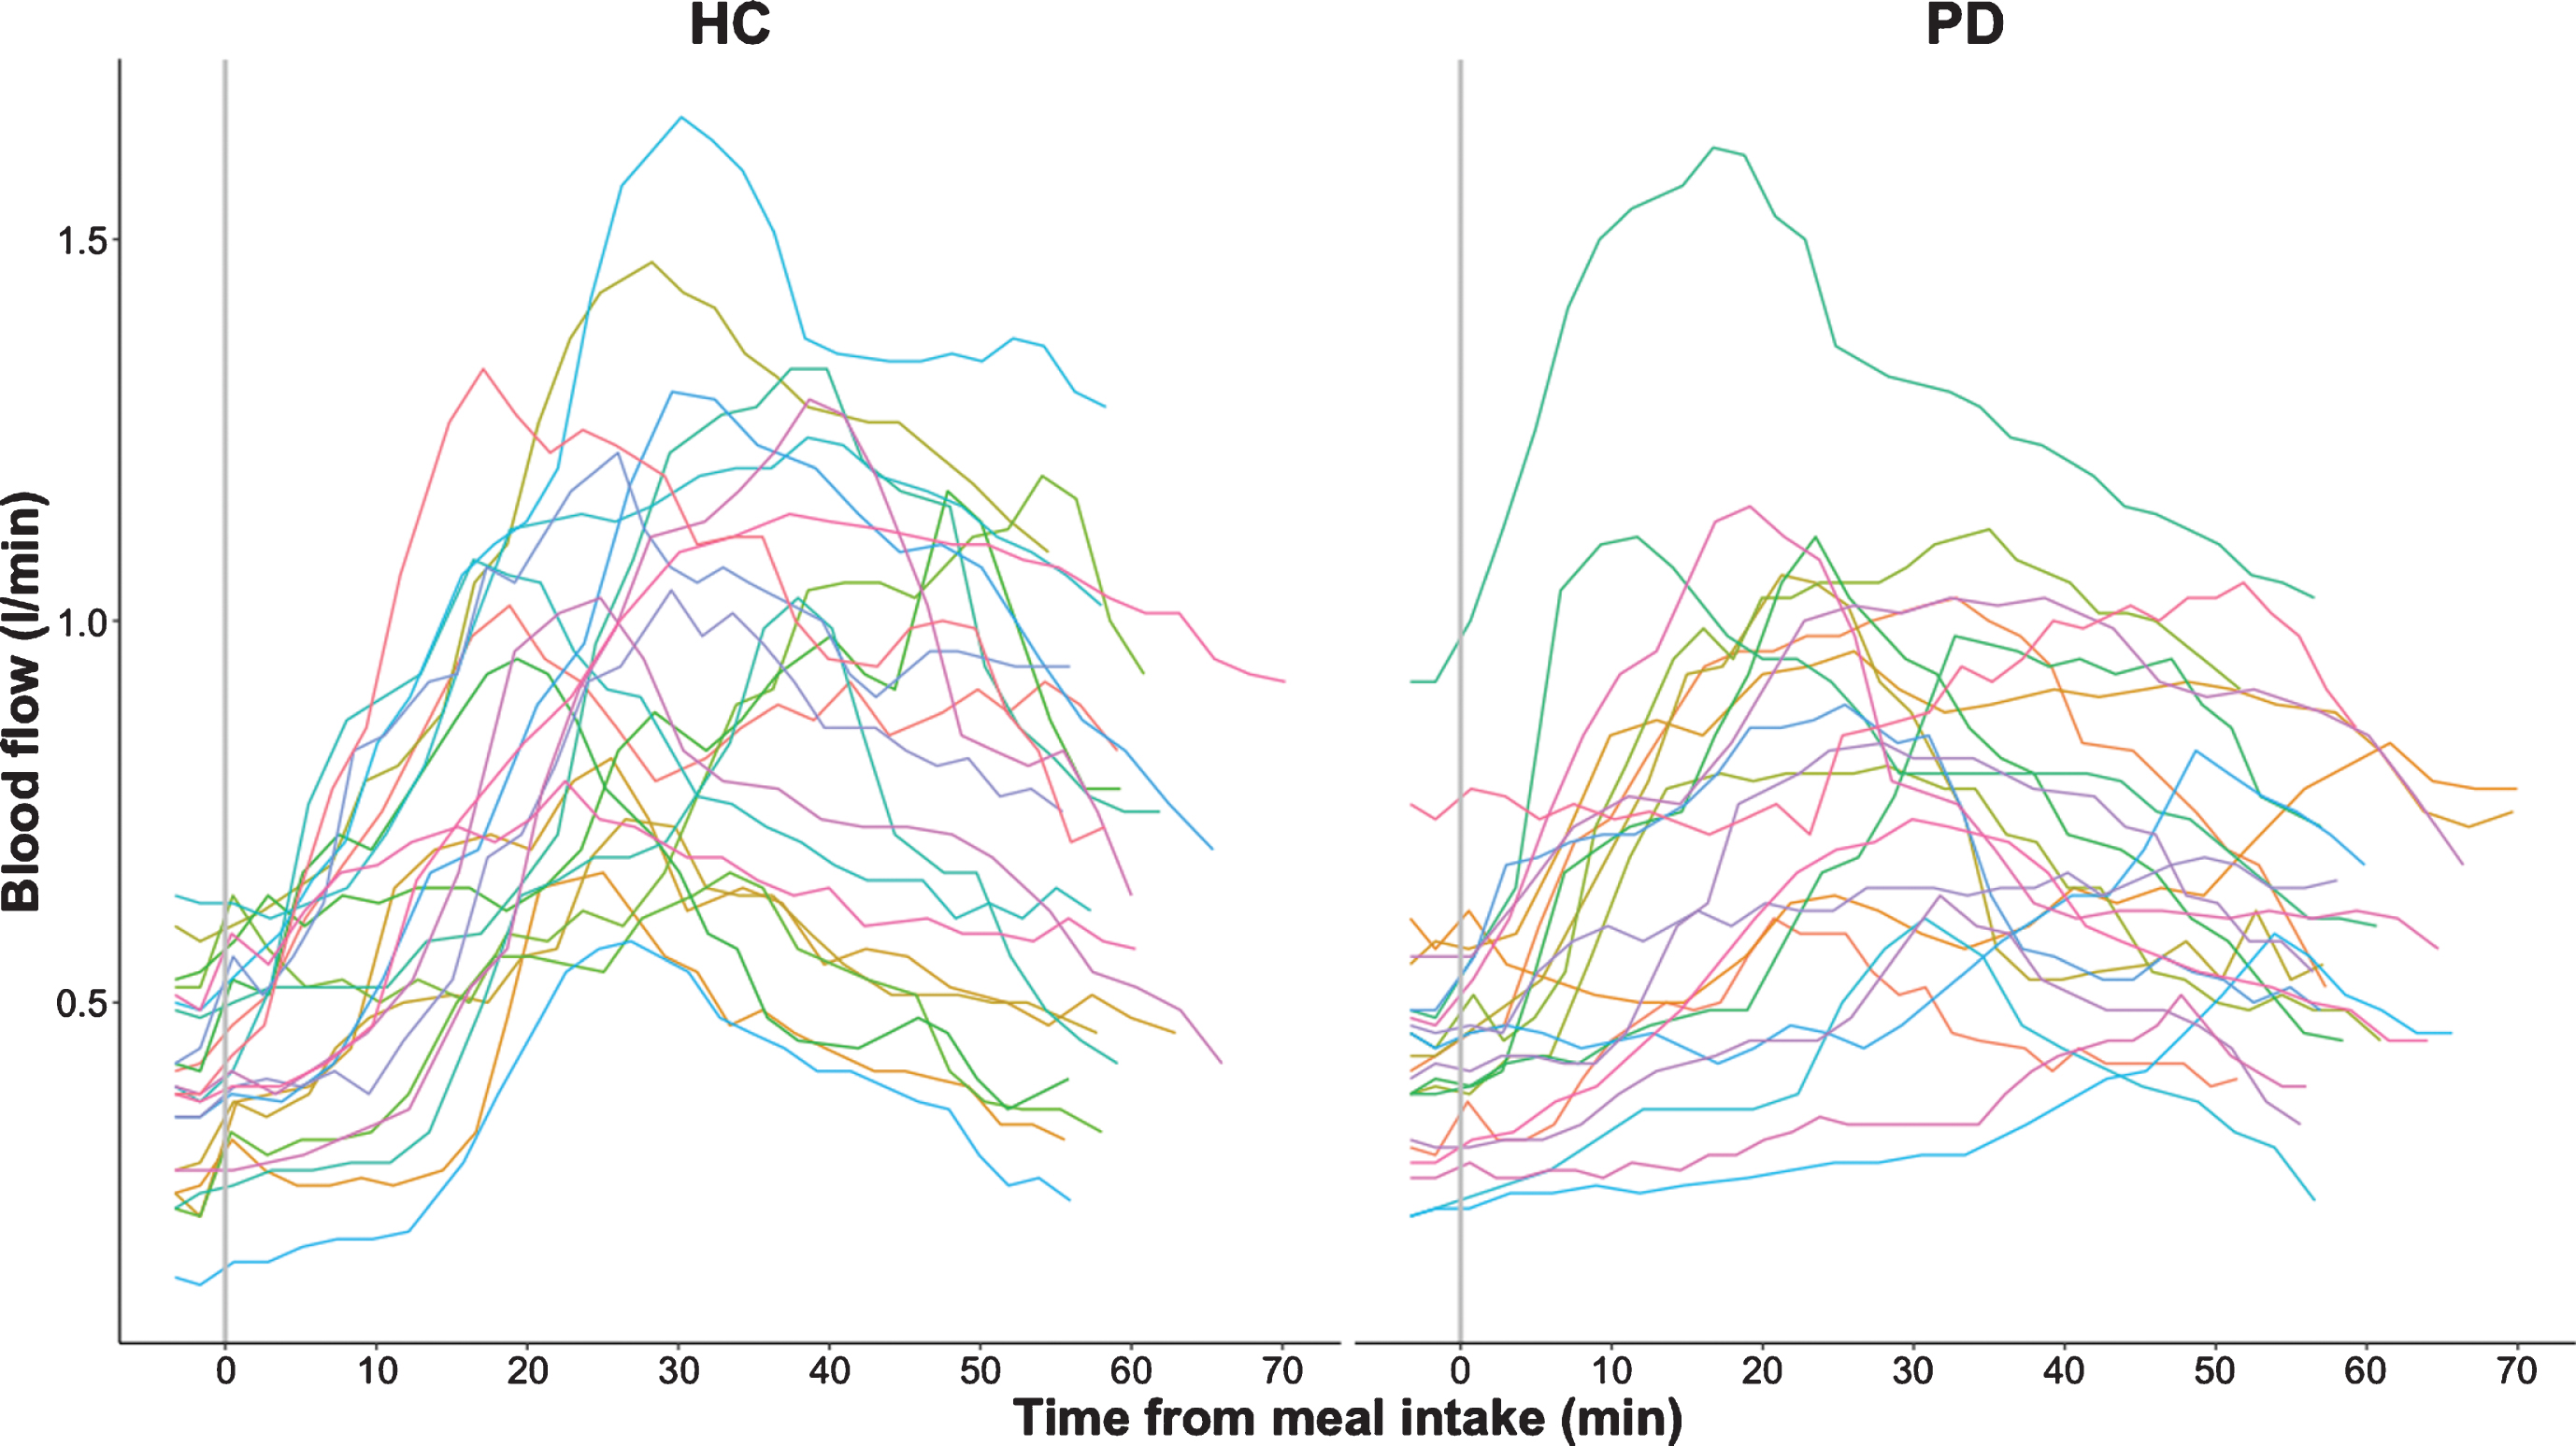 Postprandial superior mesenteric artery blood flow measurements in healthy controls (HC) and participants with Parkinson’s disease (PD). The absolute blood flow measurements are connected using linear interpolation.